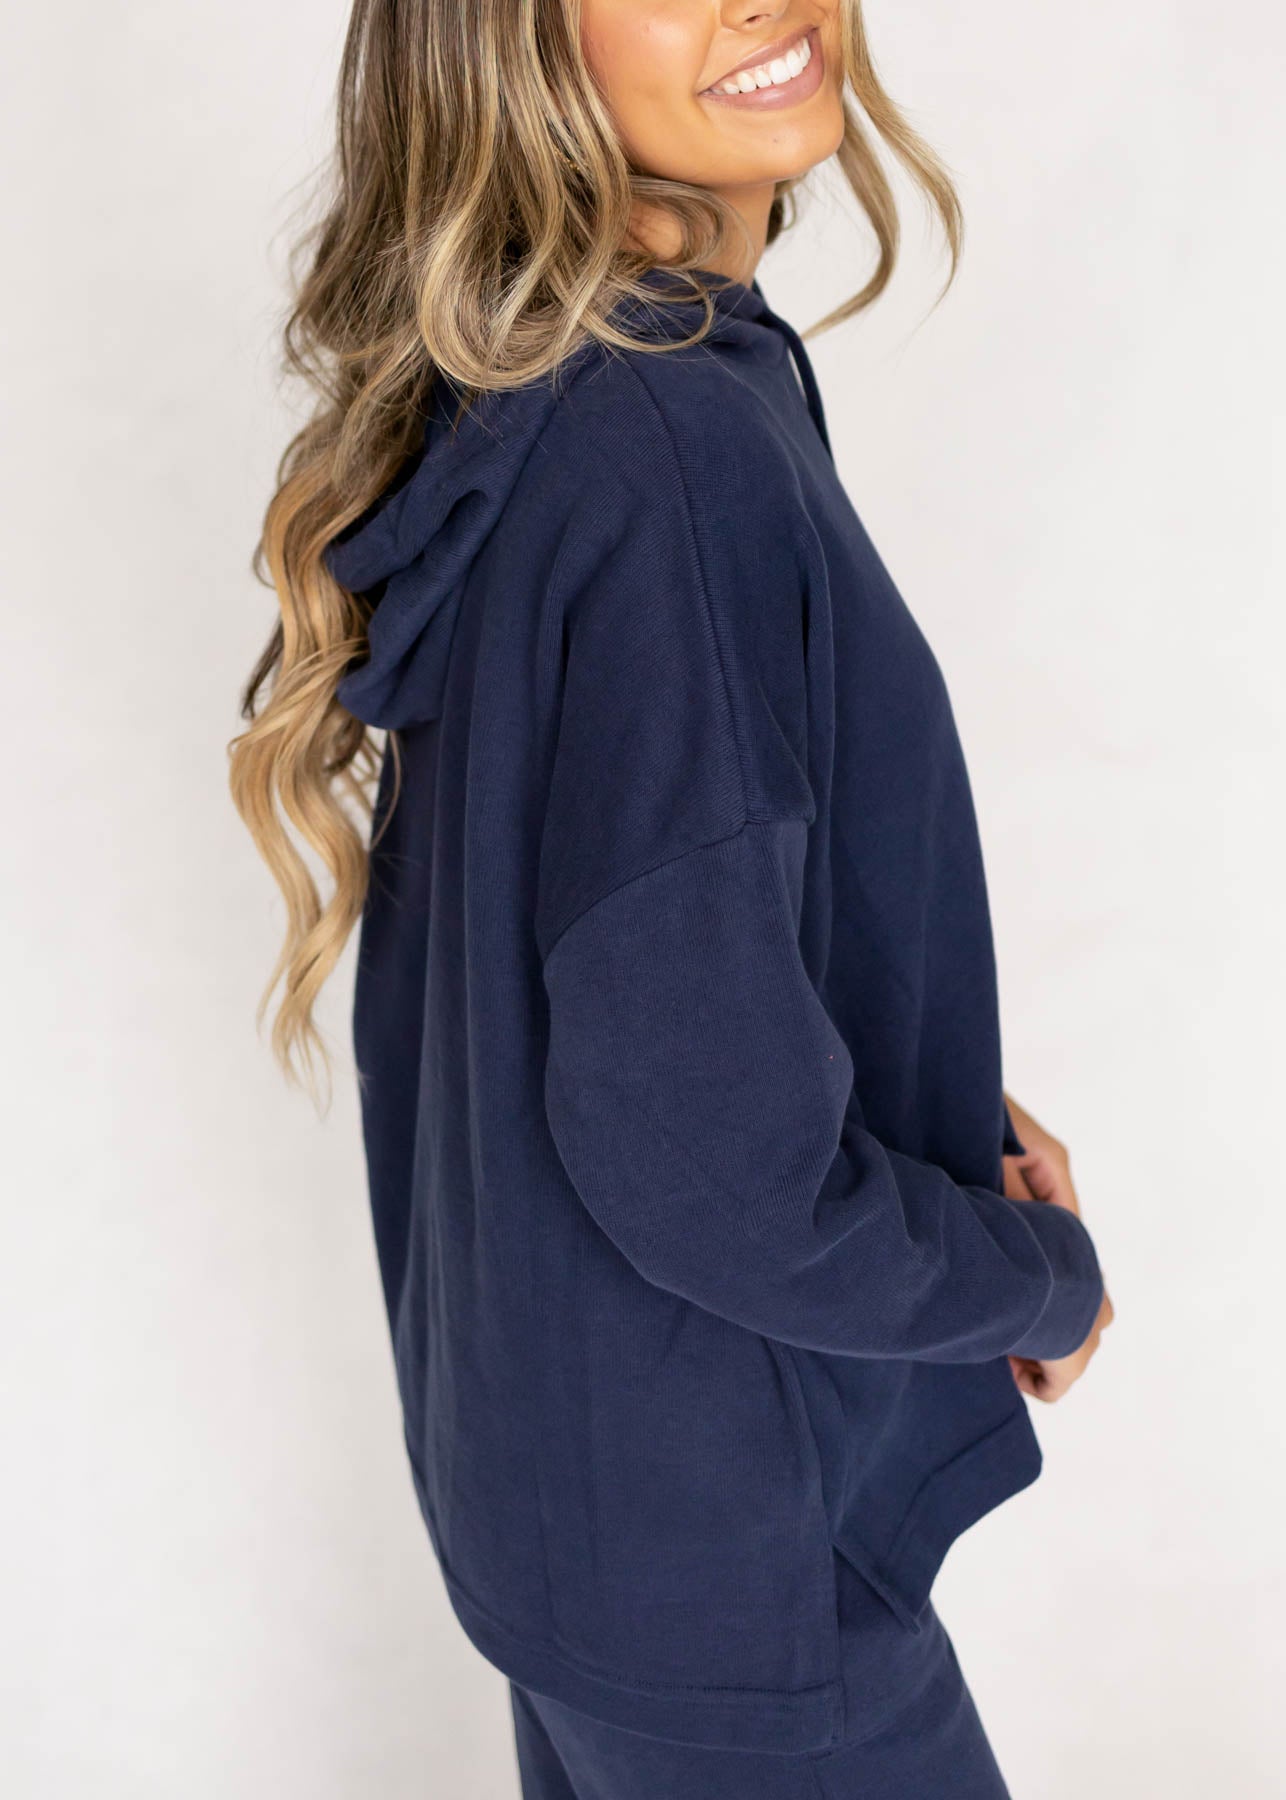 Side view of a dark navy top